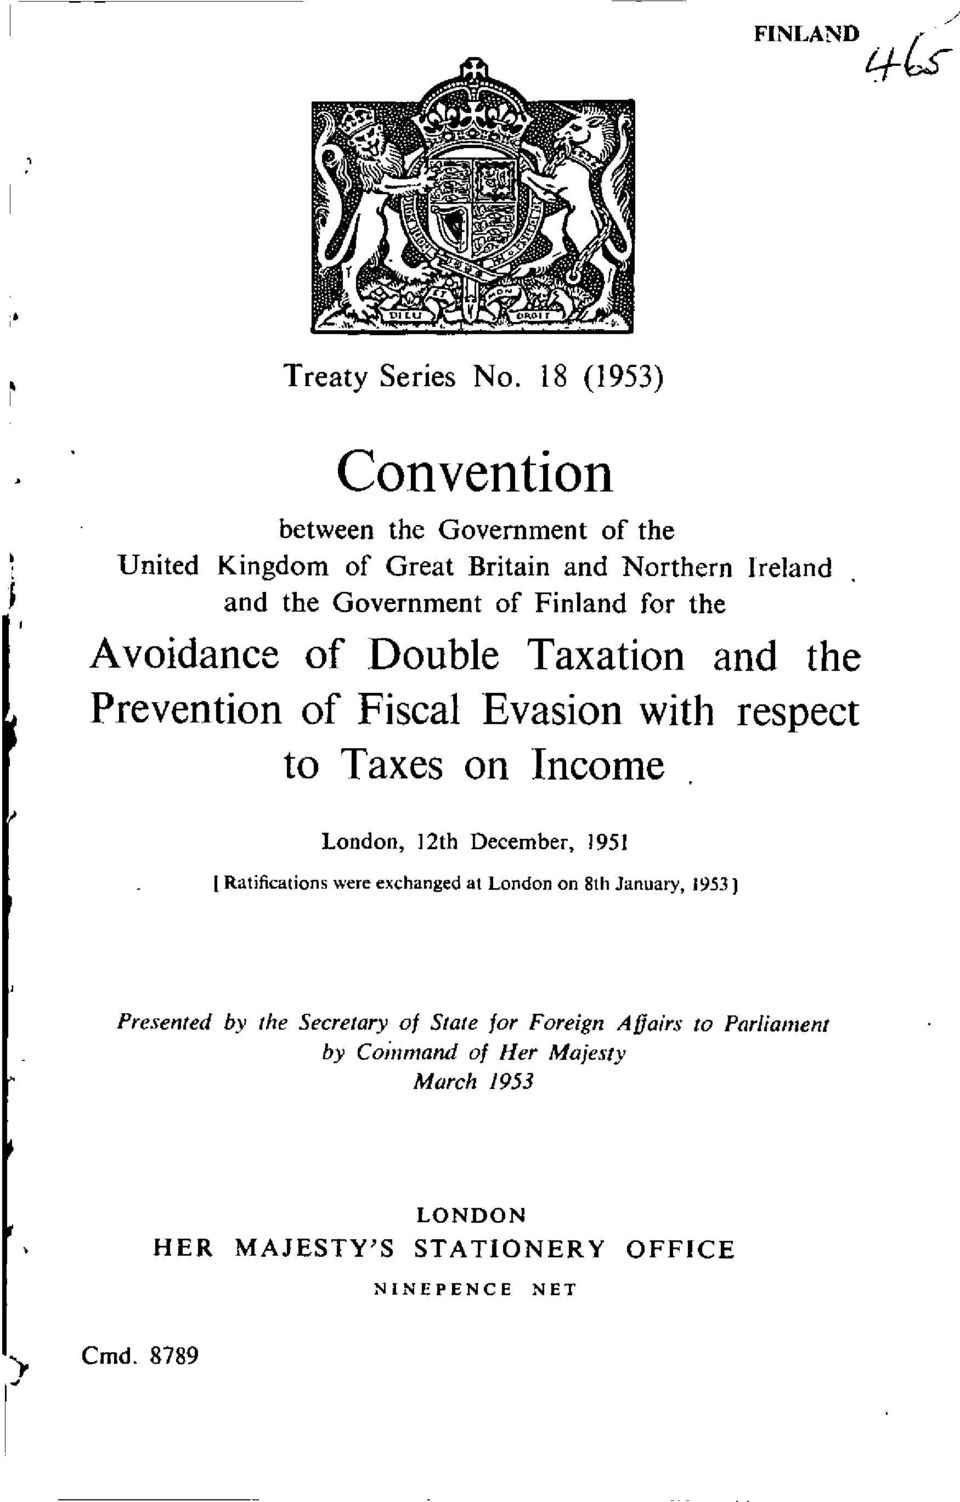 Finland for the Avoidance of Double Taxation and the Prevention of Fiscal Evasion with respect to Taxes on Income London, 12th